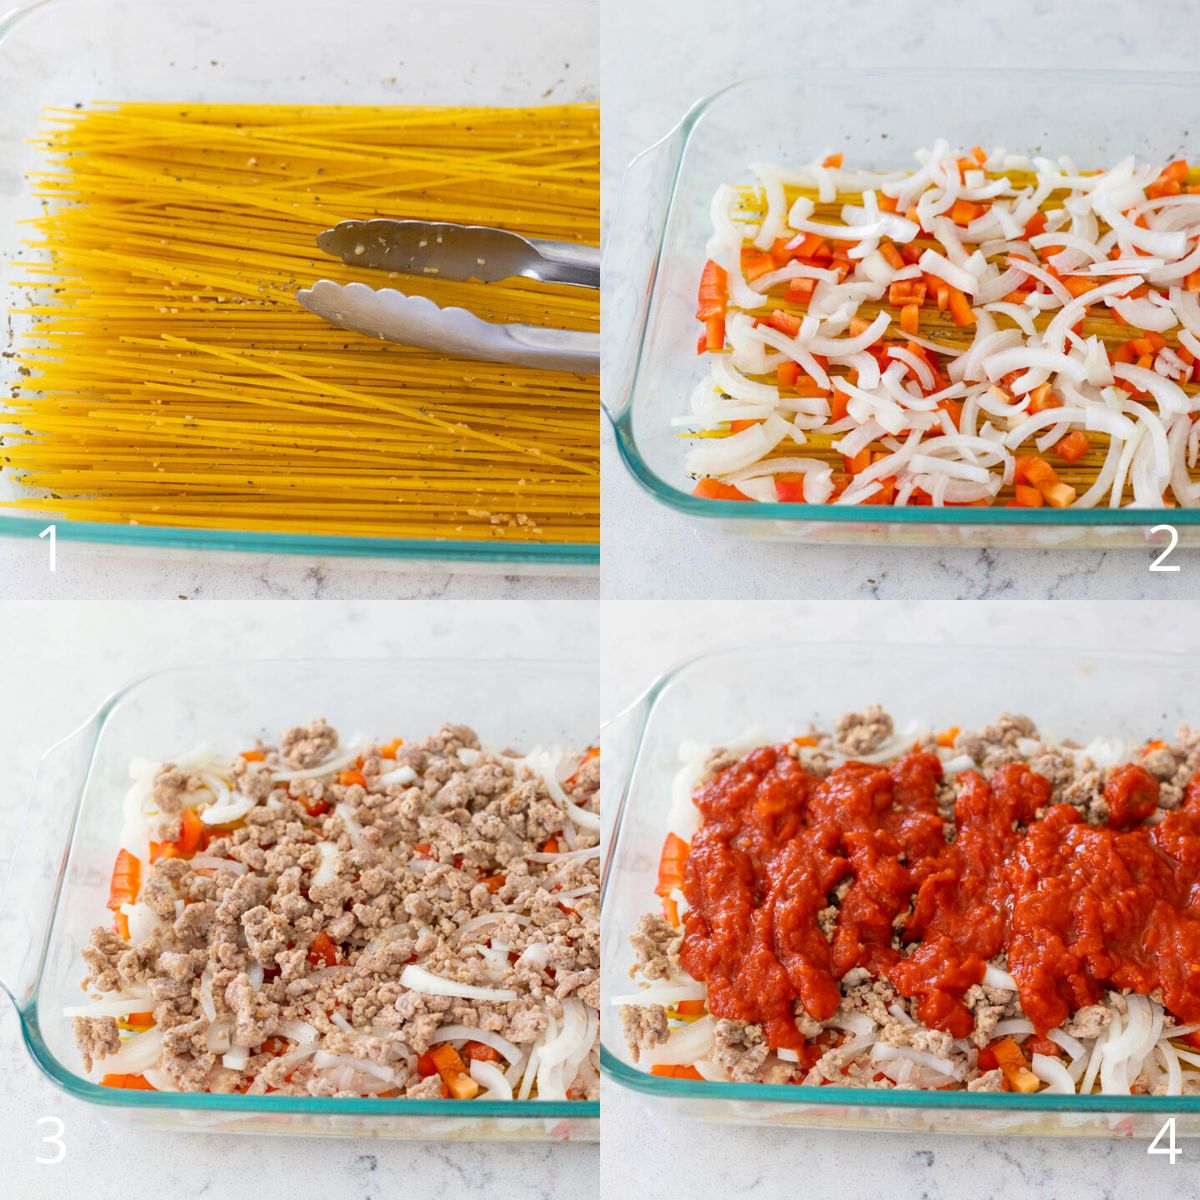 The step by step photos show how to layer the spaghetti, vegetables, and sauce.